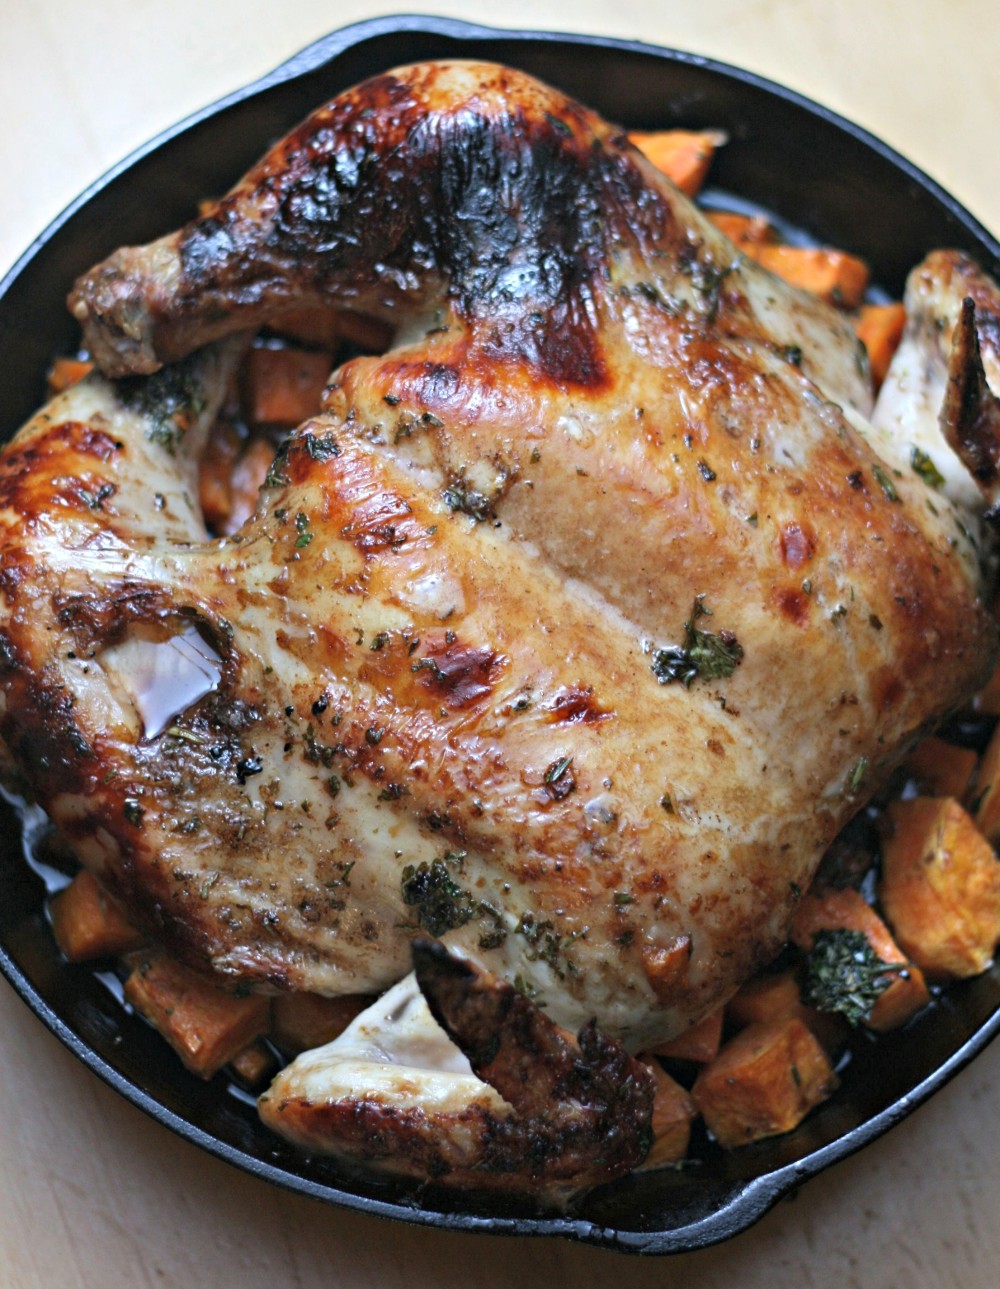 Have you ever butterflied a chicken? Butterflying your chicken makes it possible to have a whole roasted chicken on your table in 45 minutes! Here is a delicious recipe for Balsamic Butterflied Chicken with Sweet Potatoes made in a cast iron skillet.